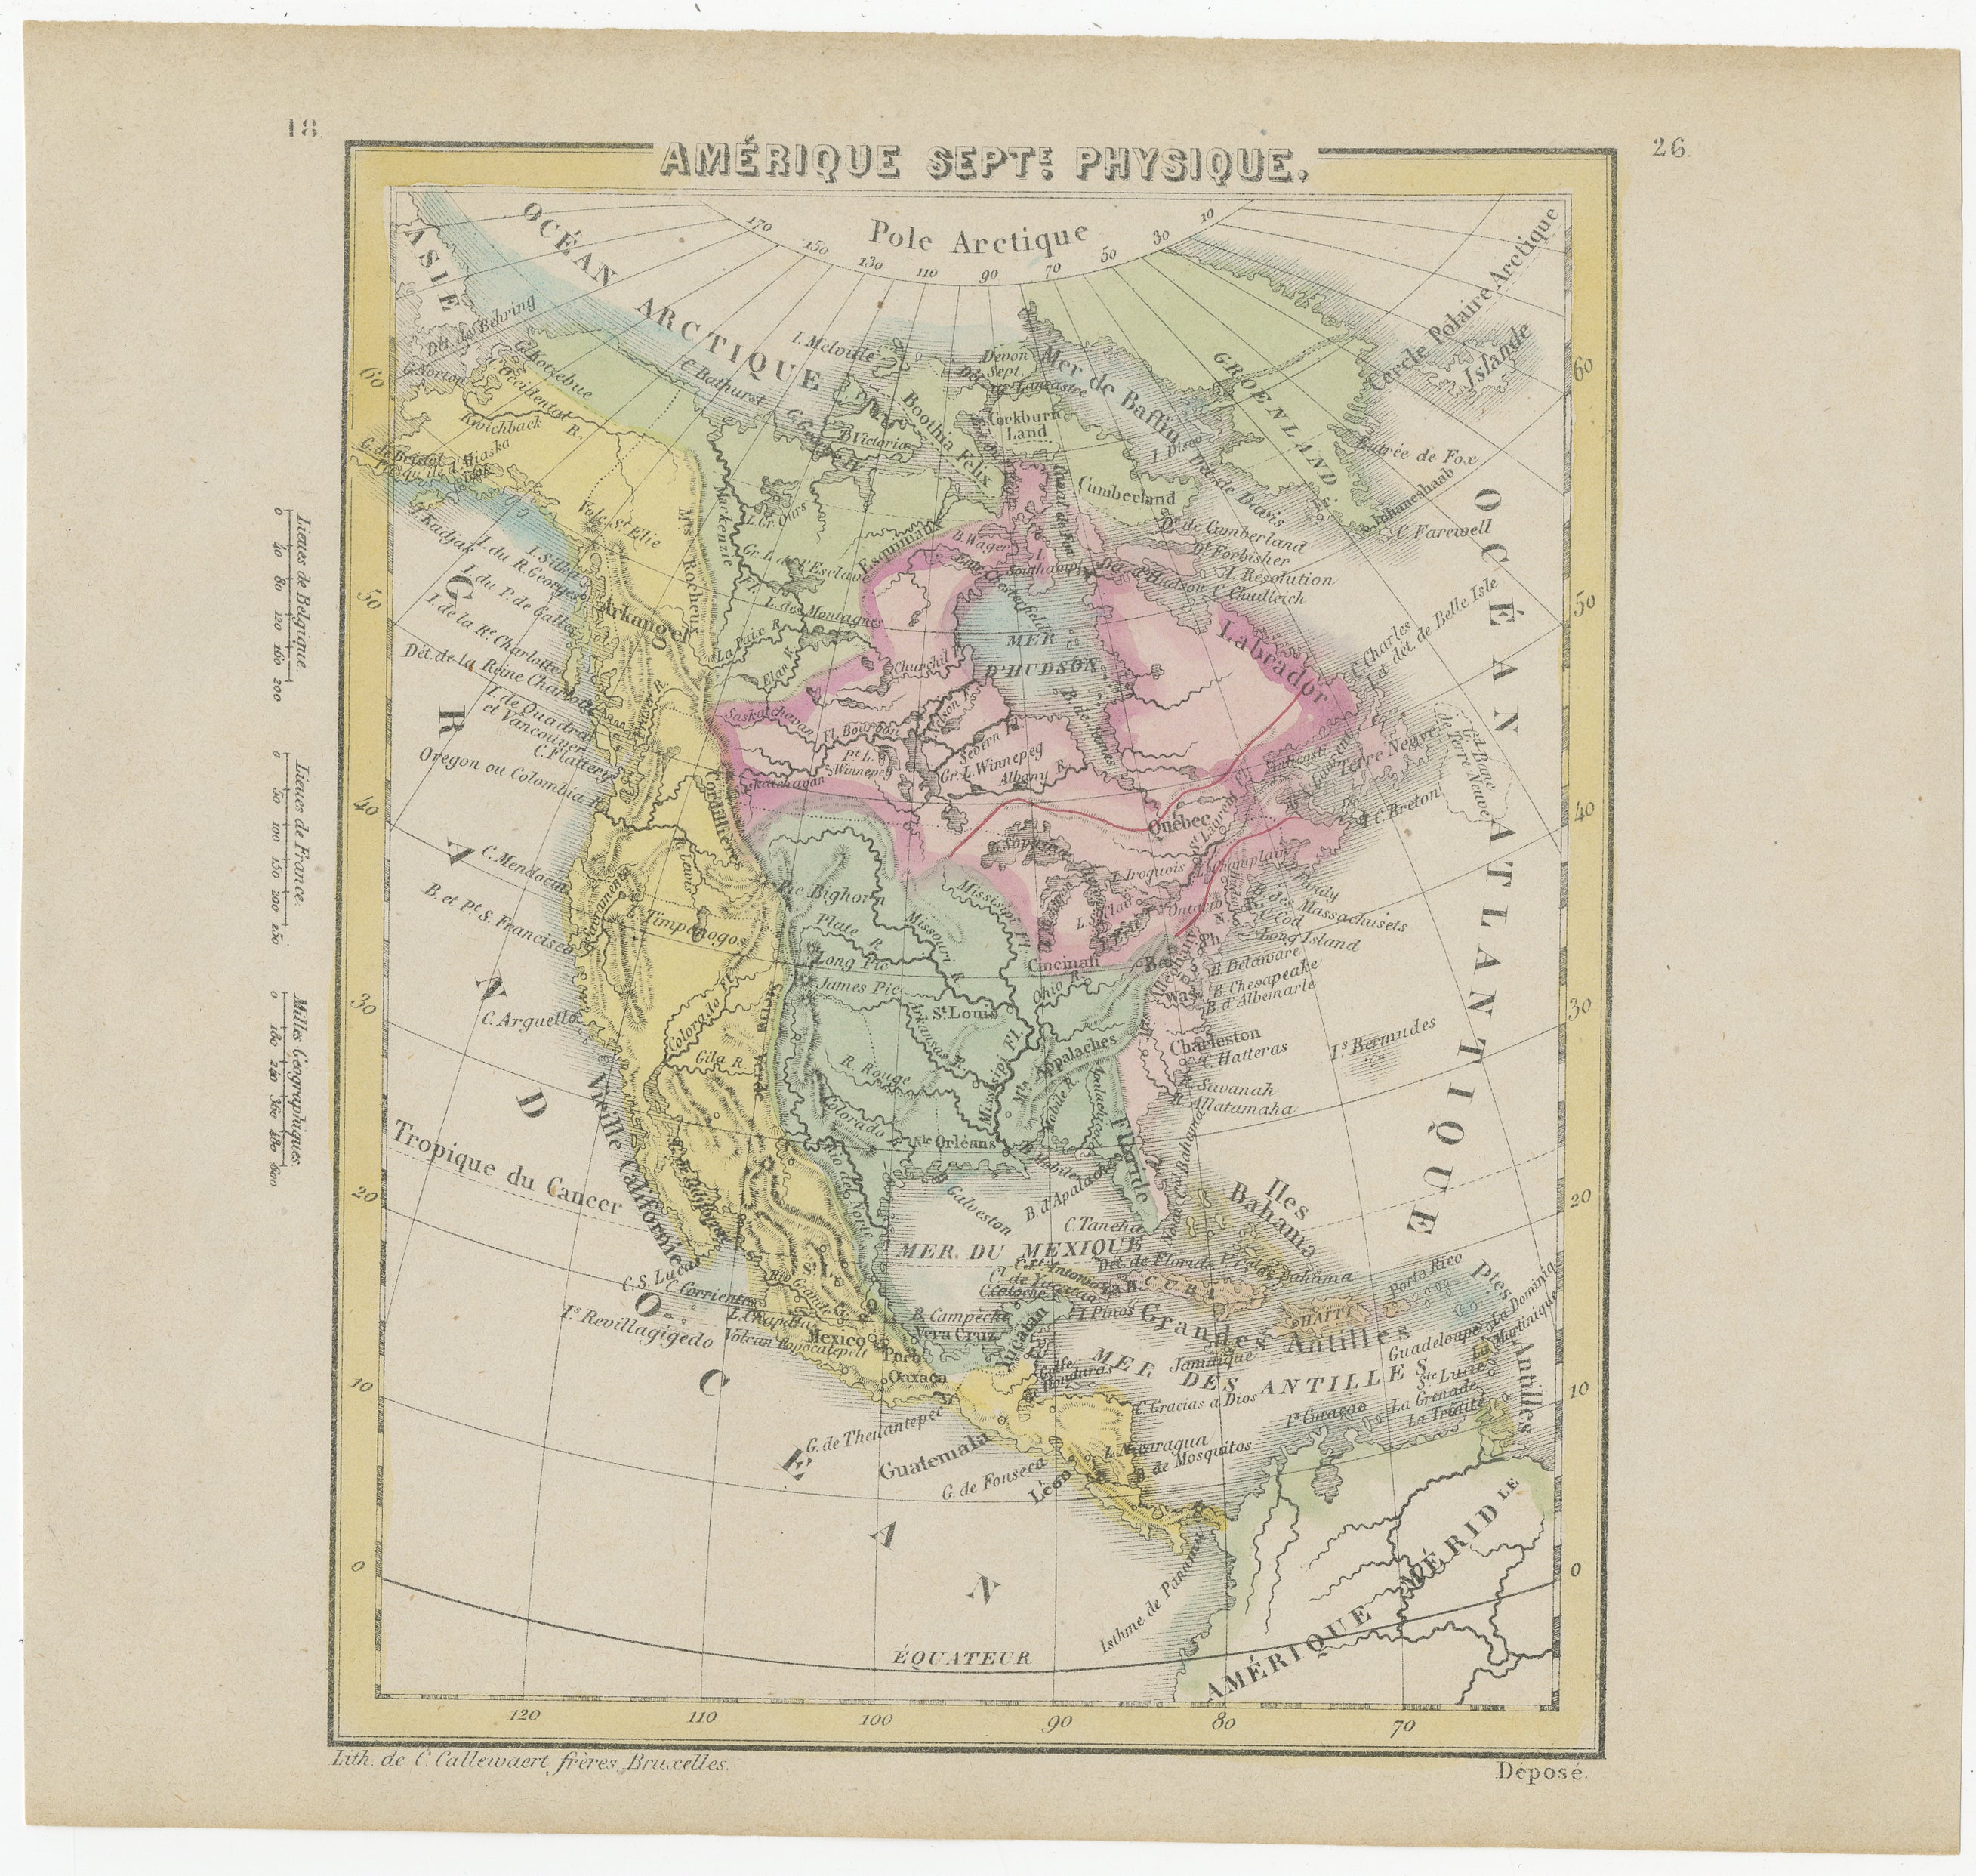 Antique map titled 'Amérique septe. Physique'. Small map of the United States. lithographed by C. Callewaert brothers in Brussels circa 1870.